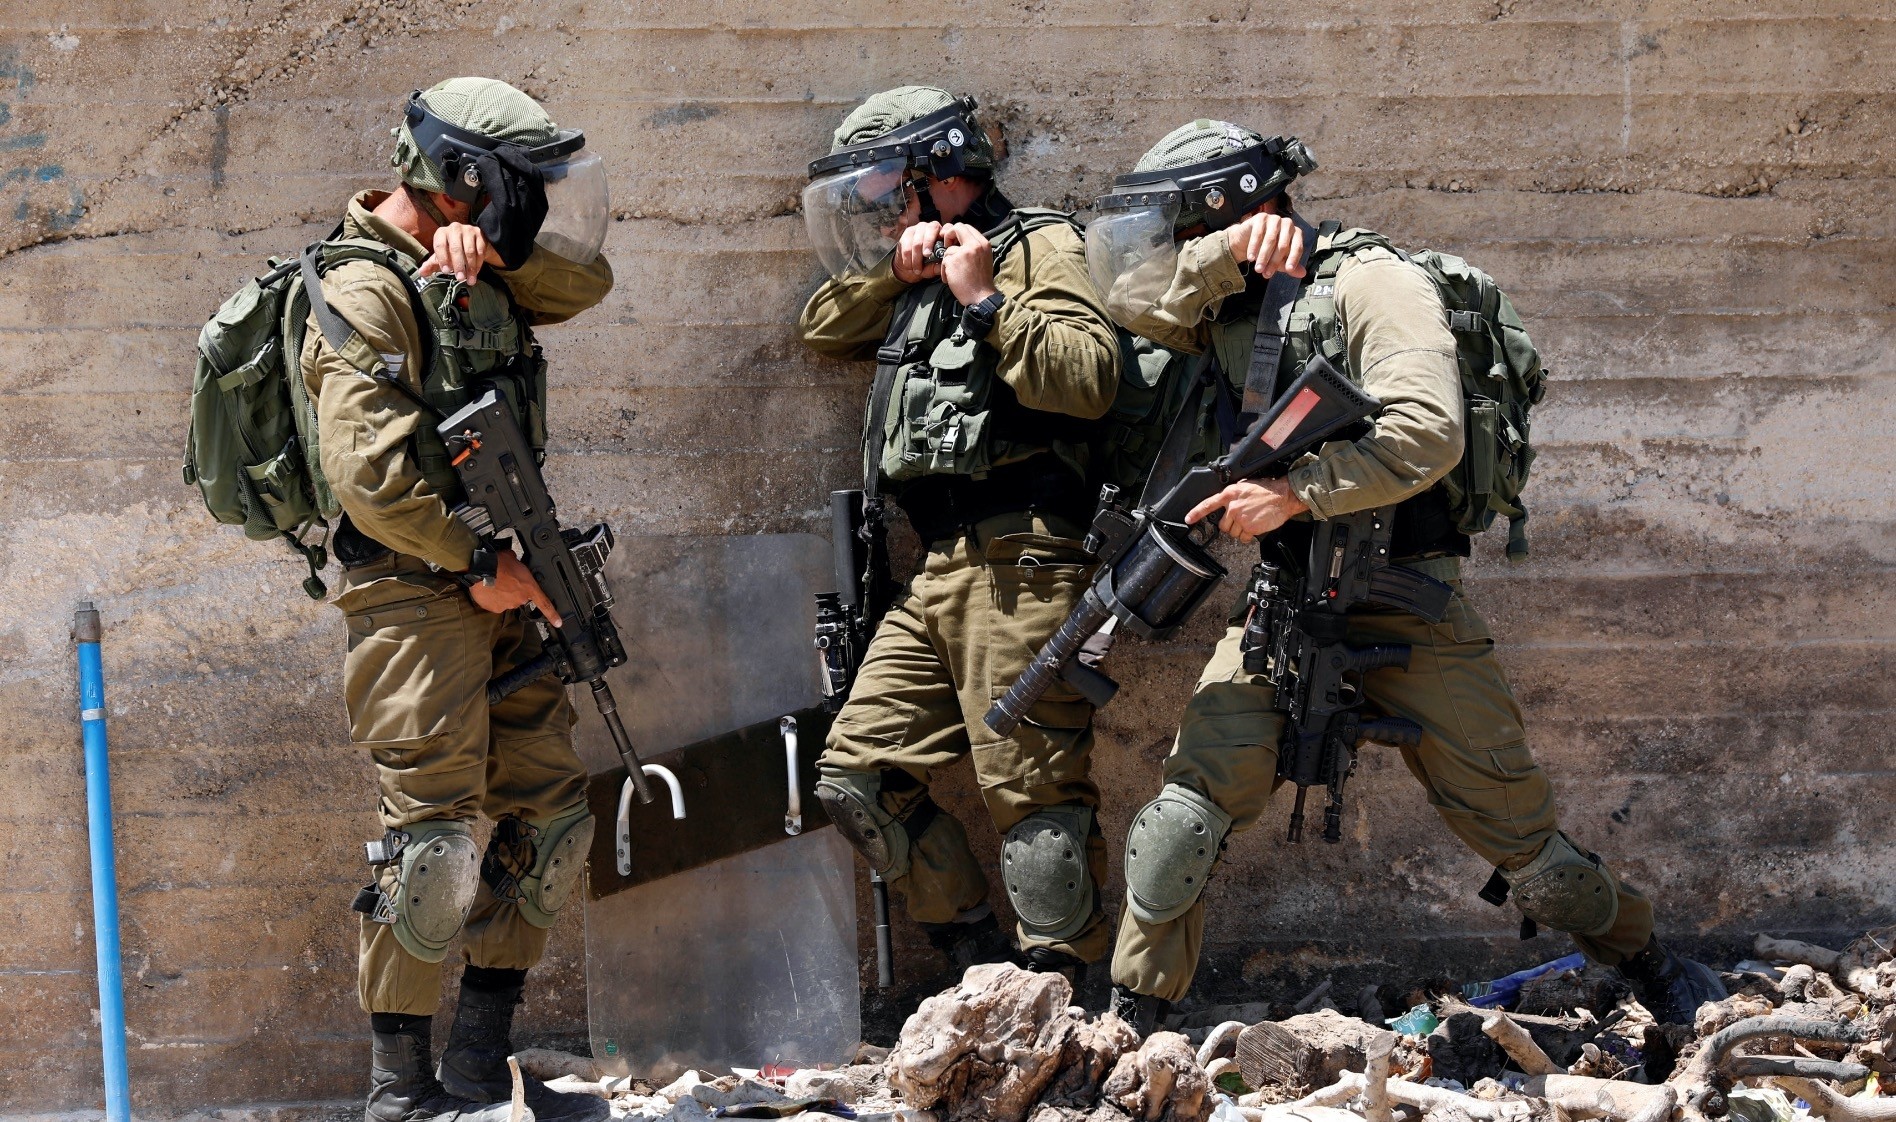 More Israeli soldiers suffer from mental problems, report says | Daily ...